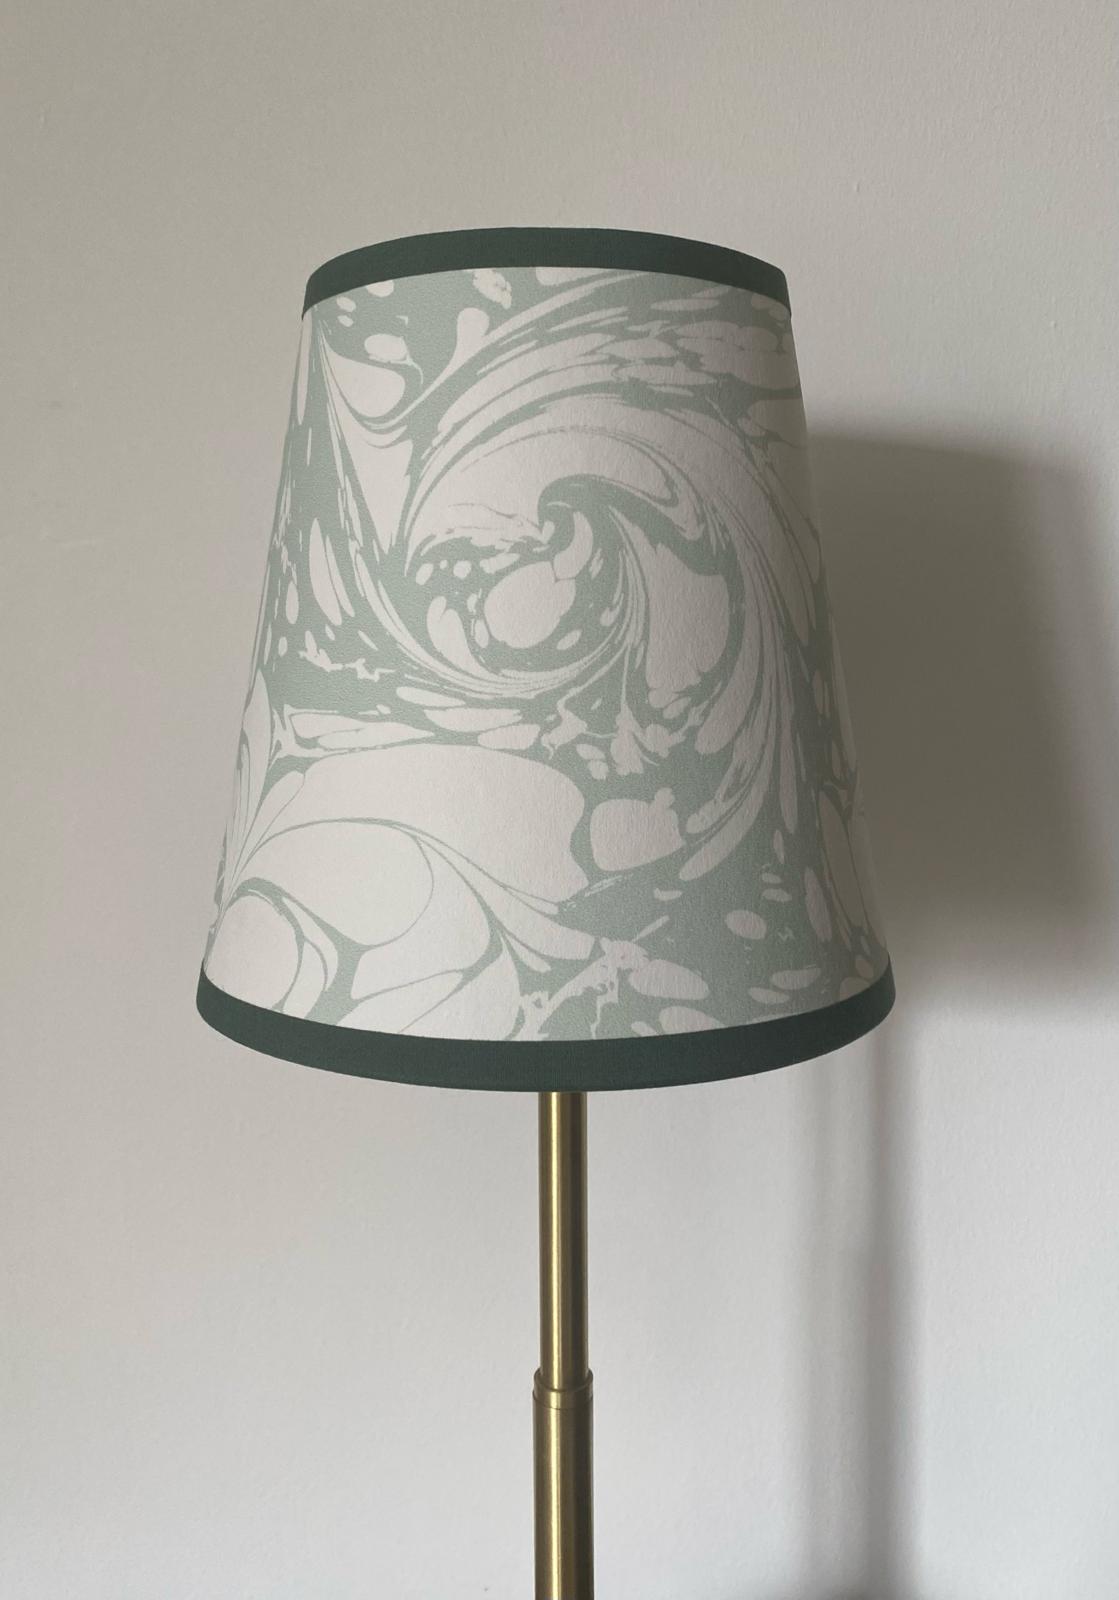 House of Amitié Marbled Paper Lampshade - Flourish Willow - Empire - Size Small